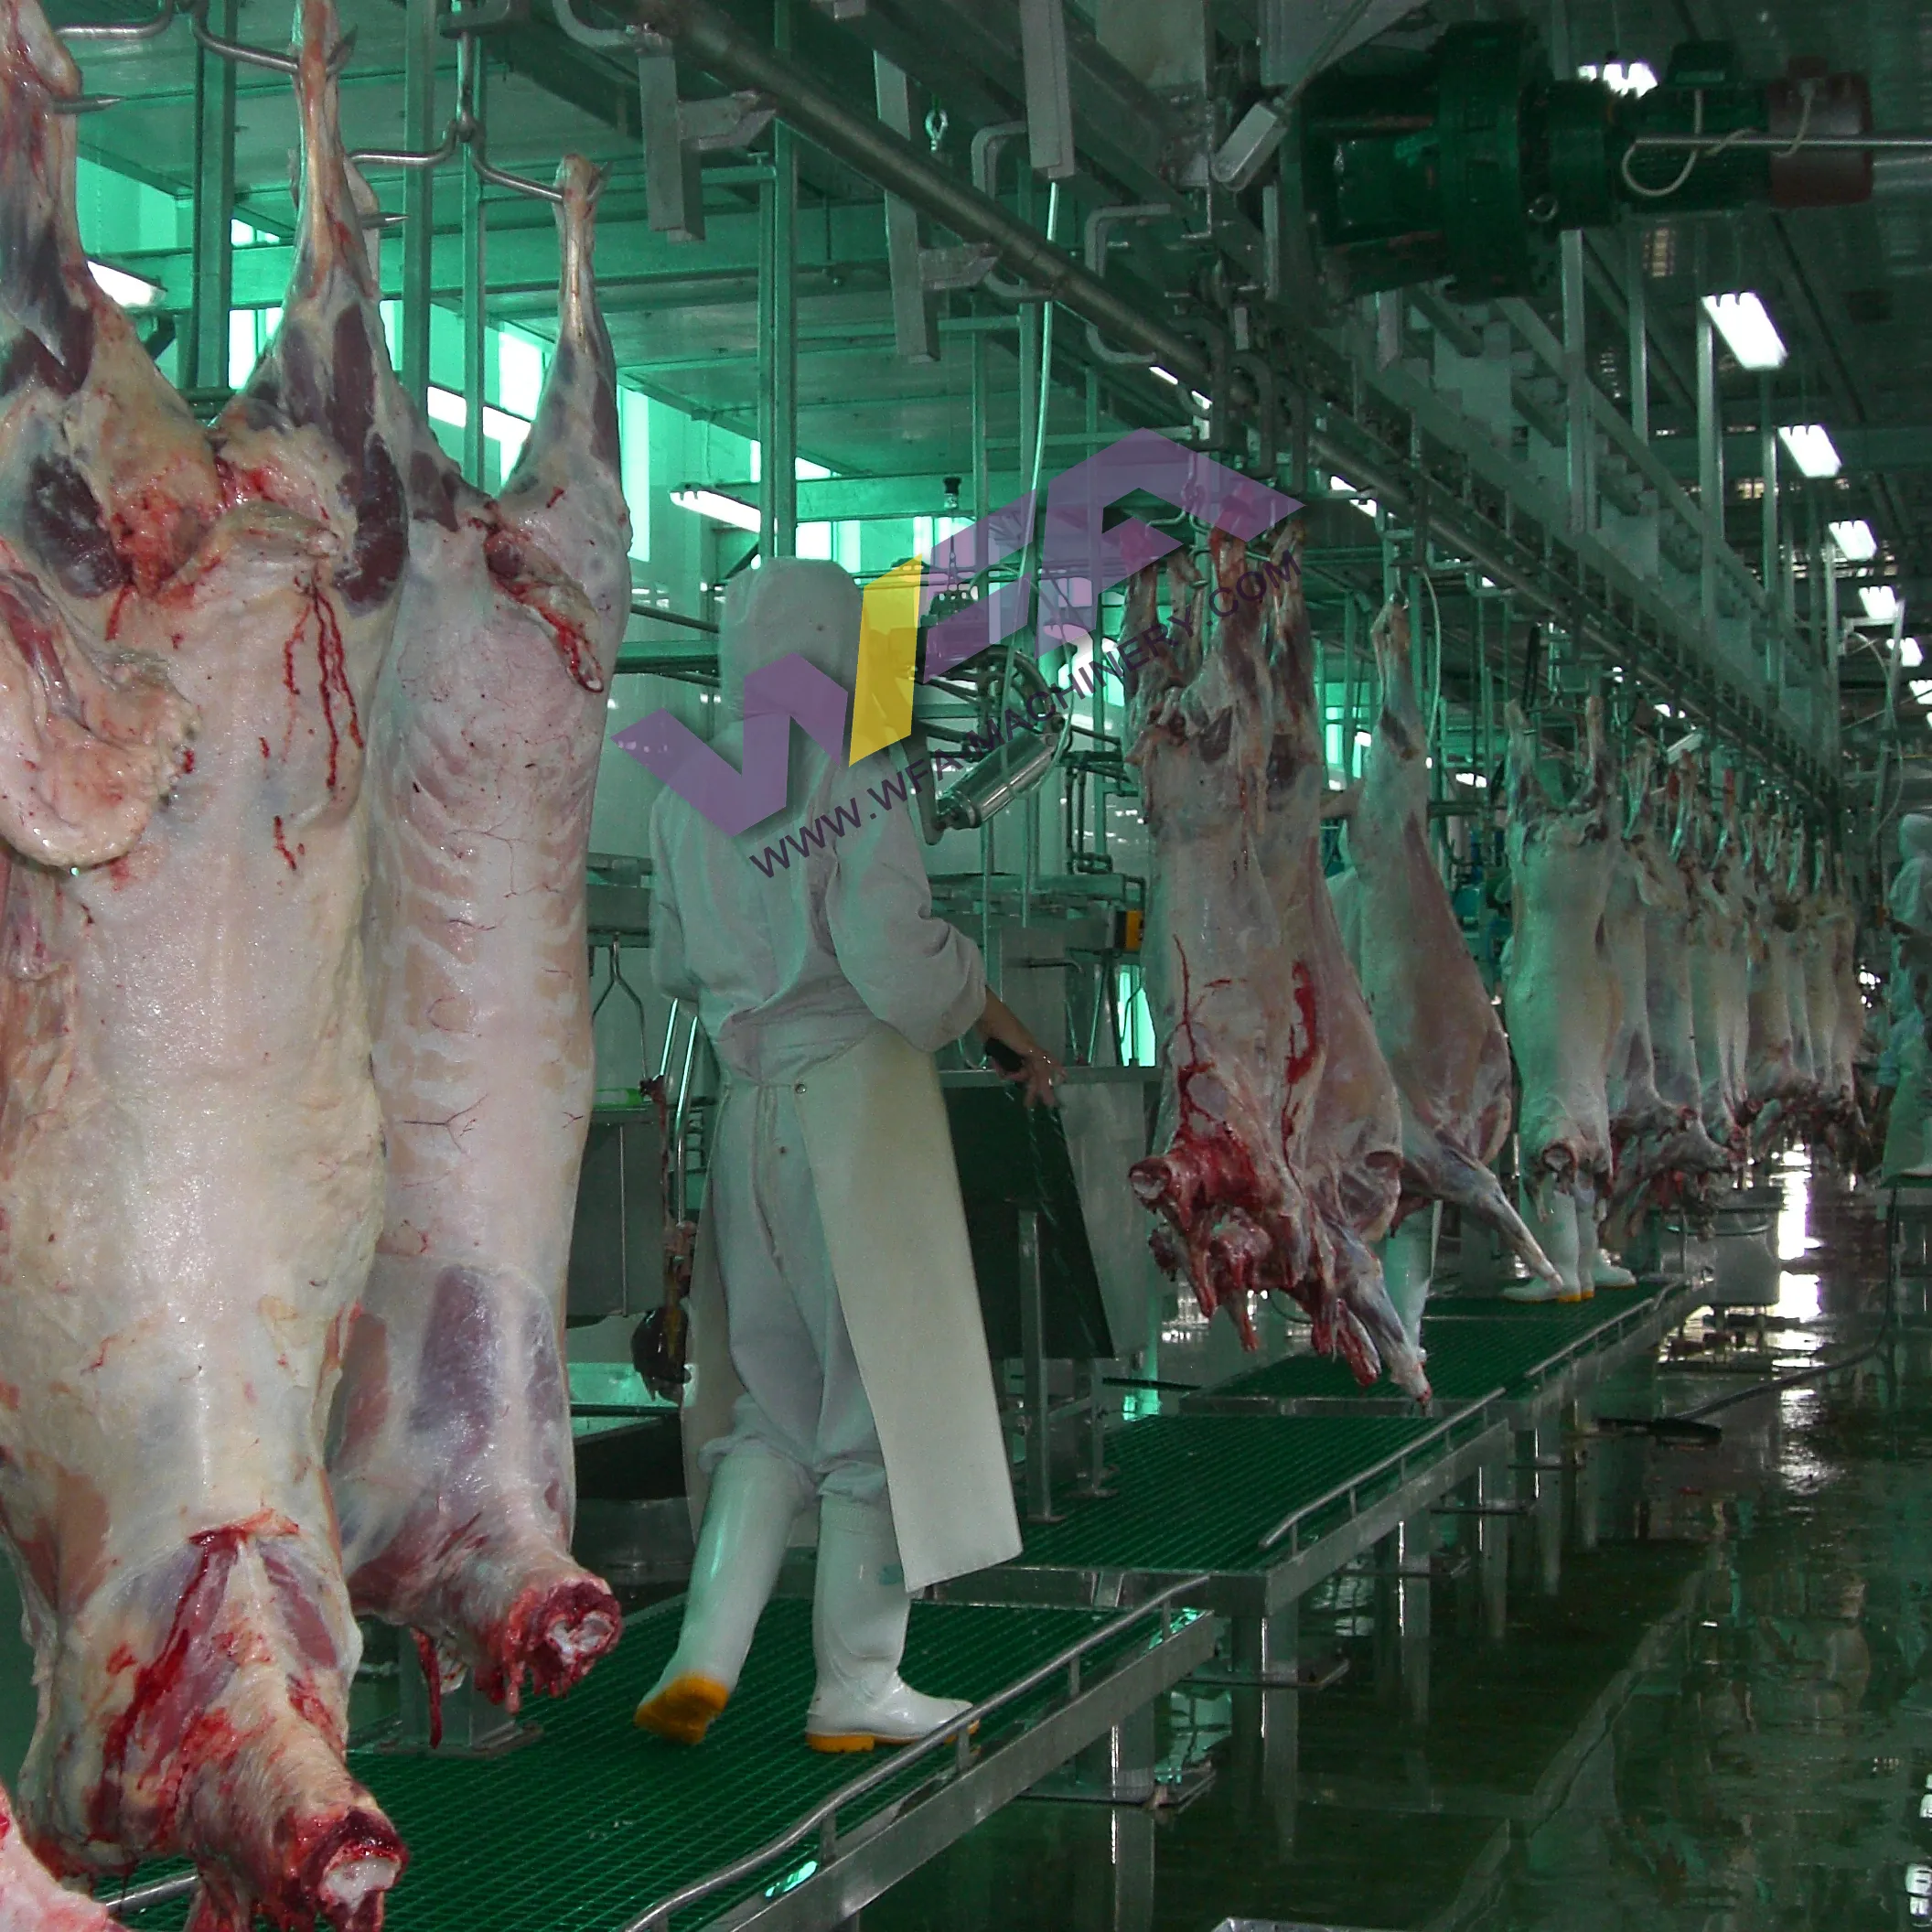 Turnkey Project Sheep Abattoir Goat Slaughtering Equipment Carcass Mutton Convey Rail For Slaughterhouse Machine